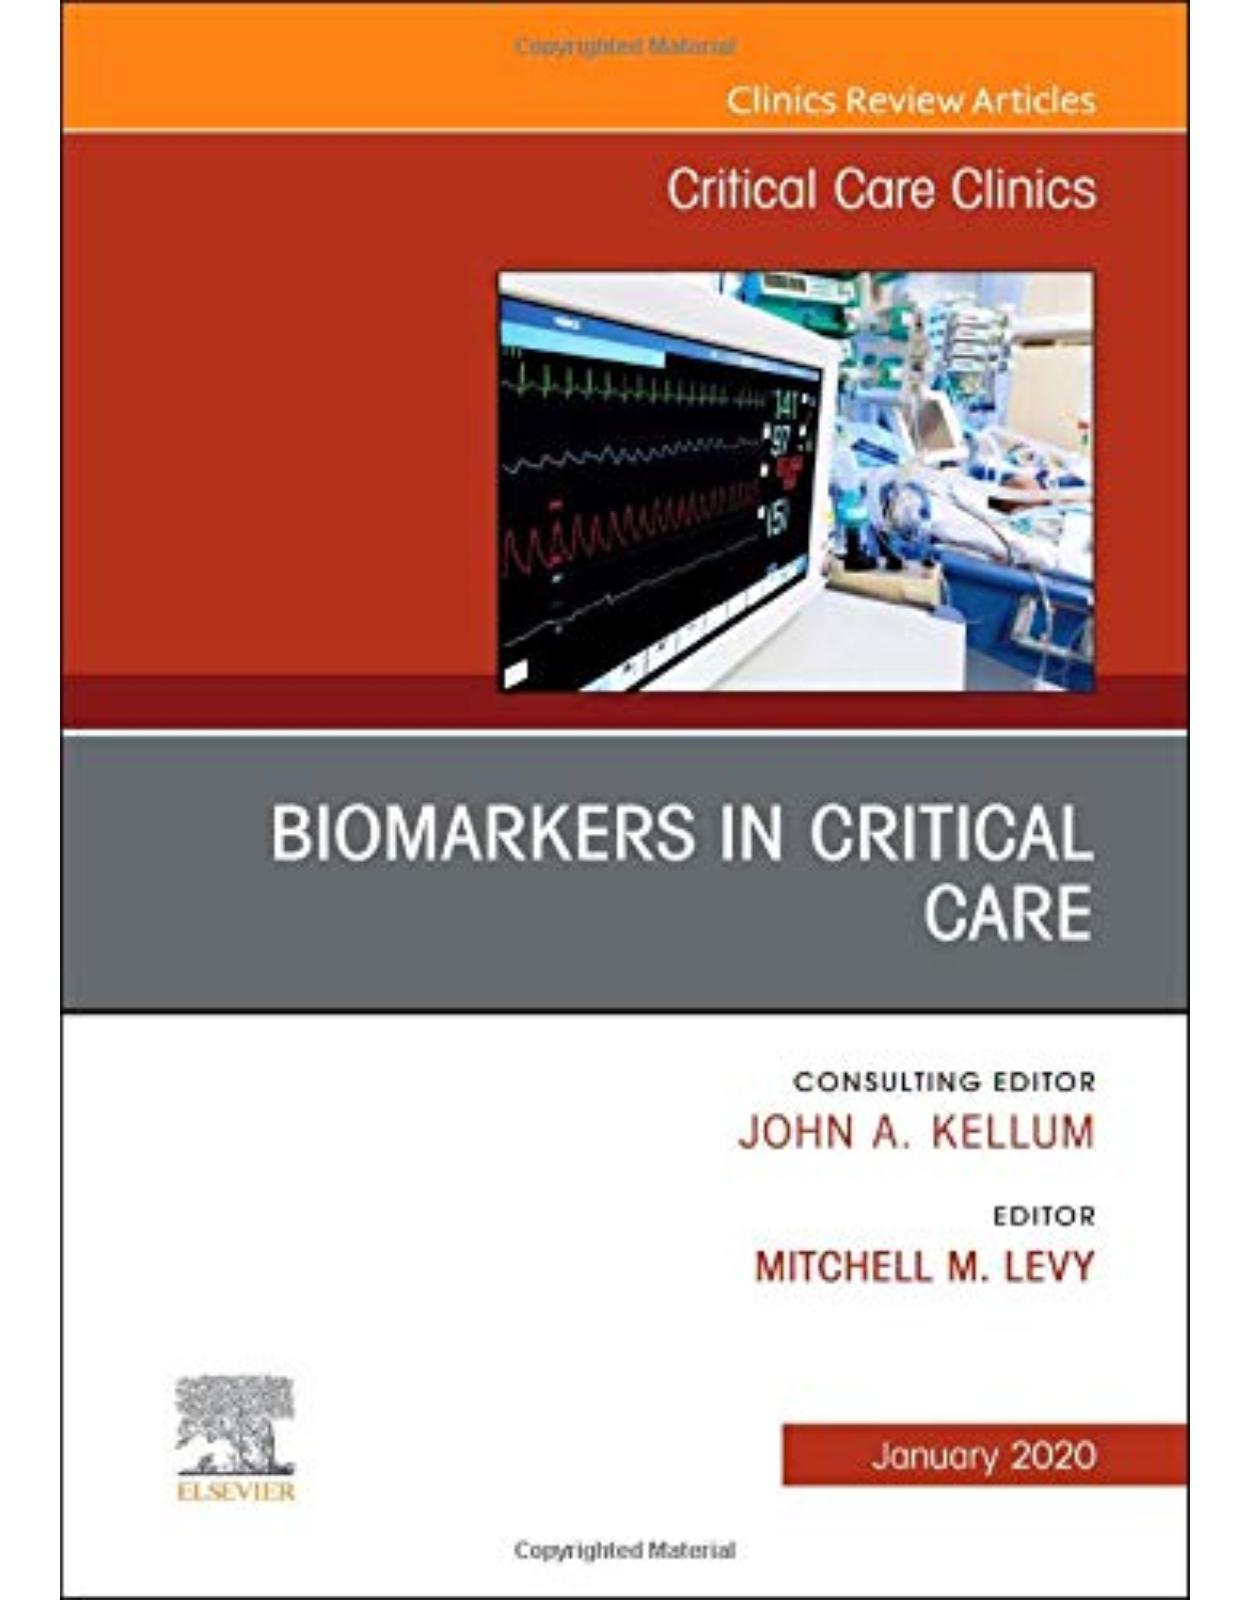 Biomarkers in Critical Care,An Issue of Critical Care Clinics, Volume 36-1